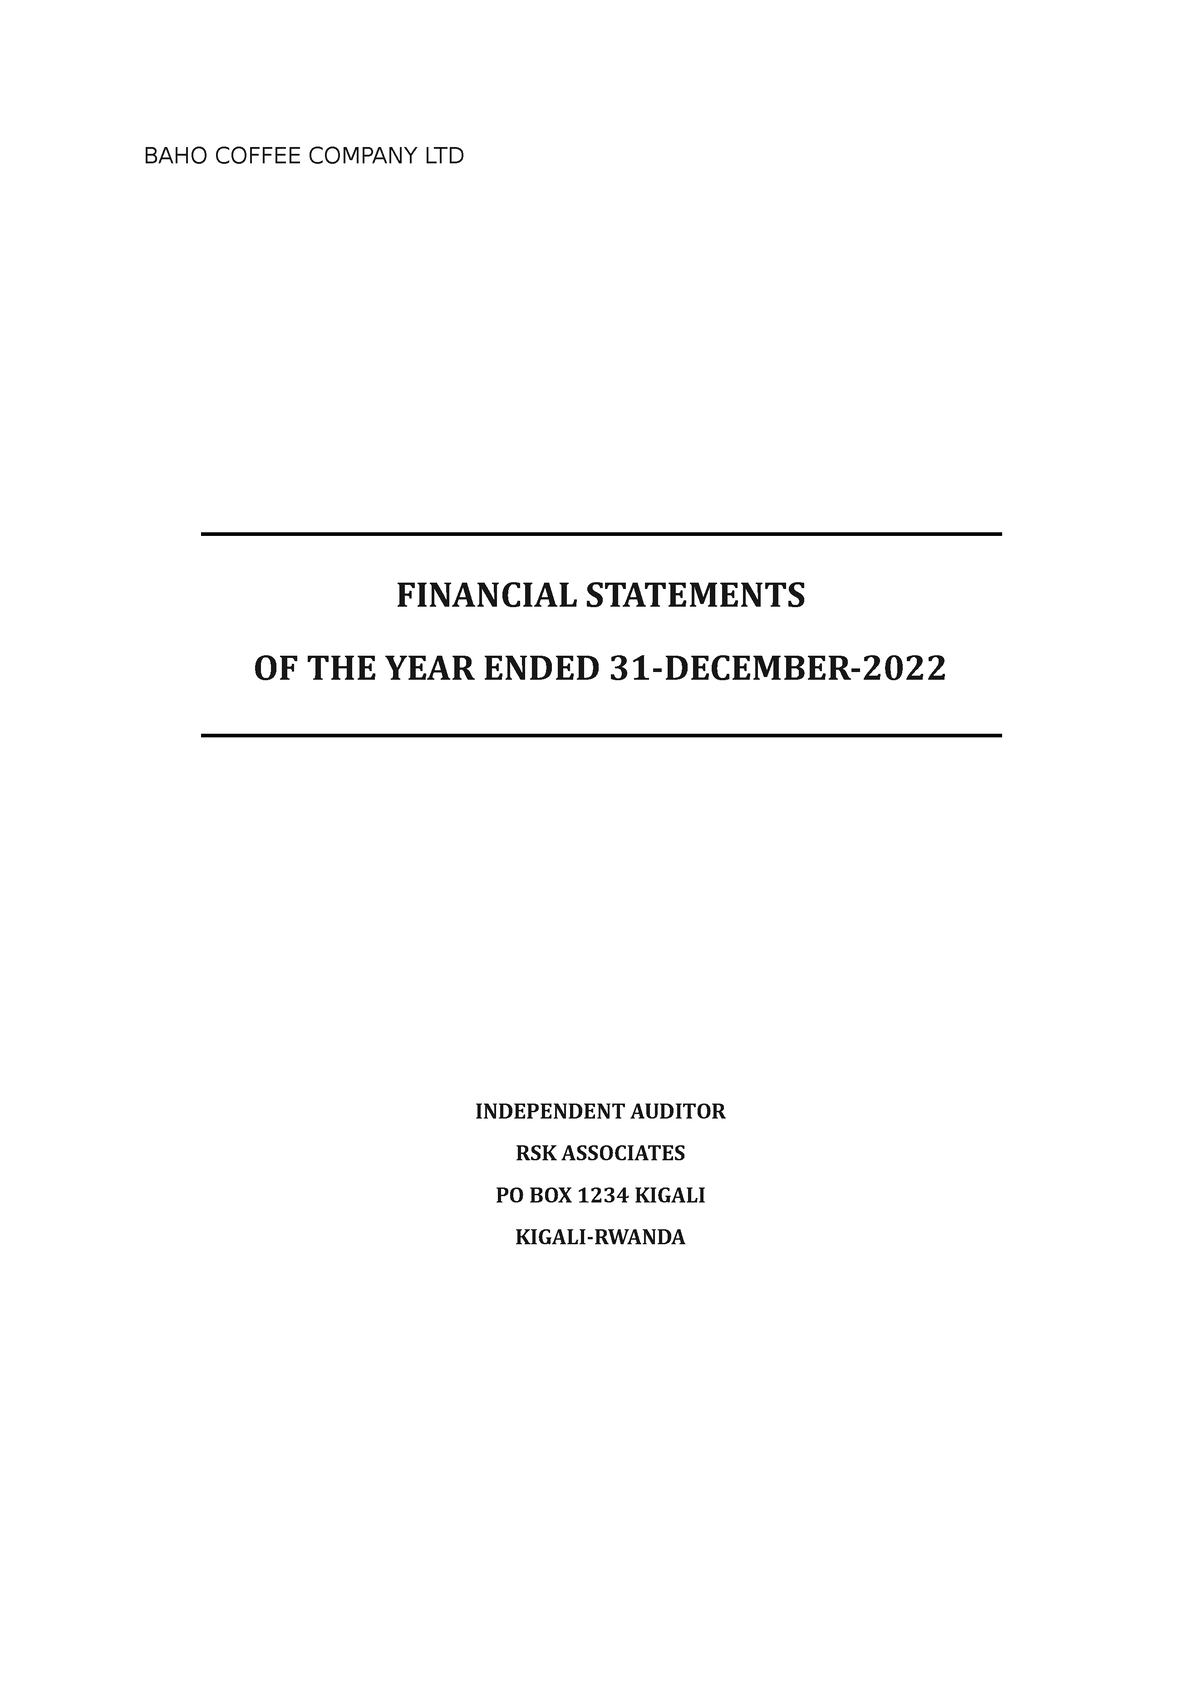 New Annual Report BAHO Coffee Company LTD 2022 - FINANCIAL STATEMENTS ...